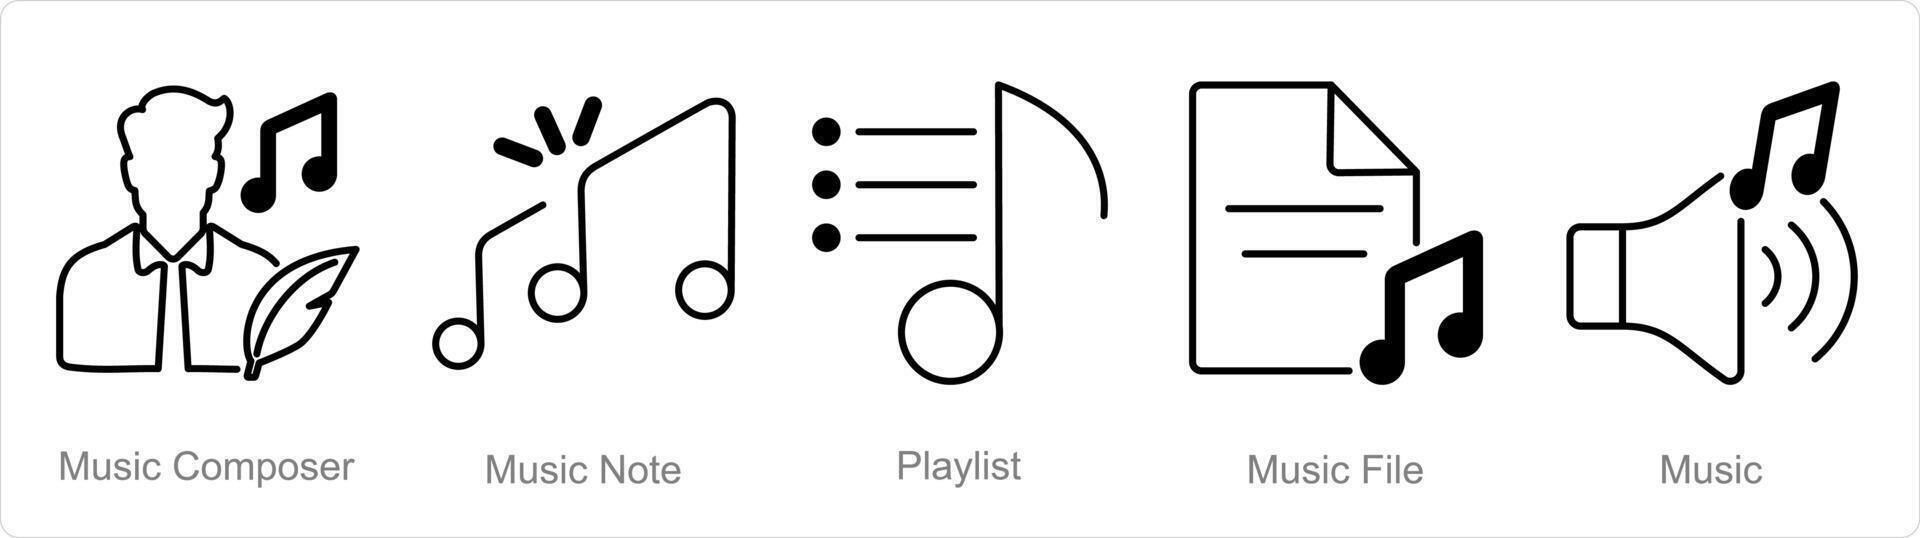 A set of 5 Music icons as music composer, music note, playlist vector